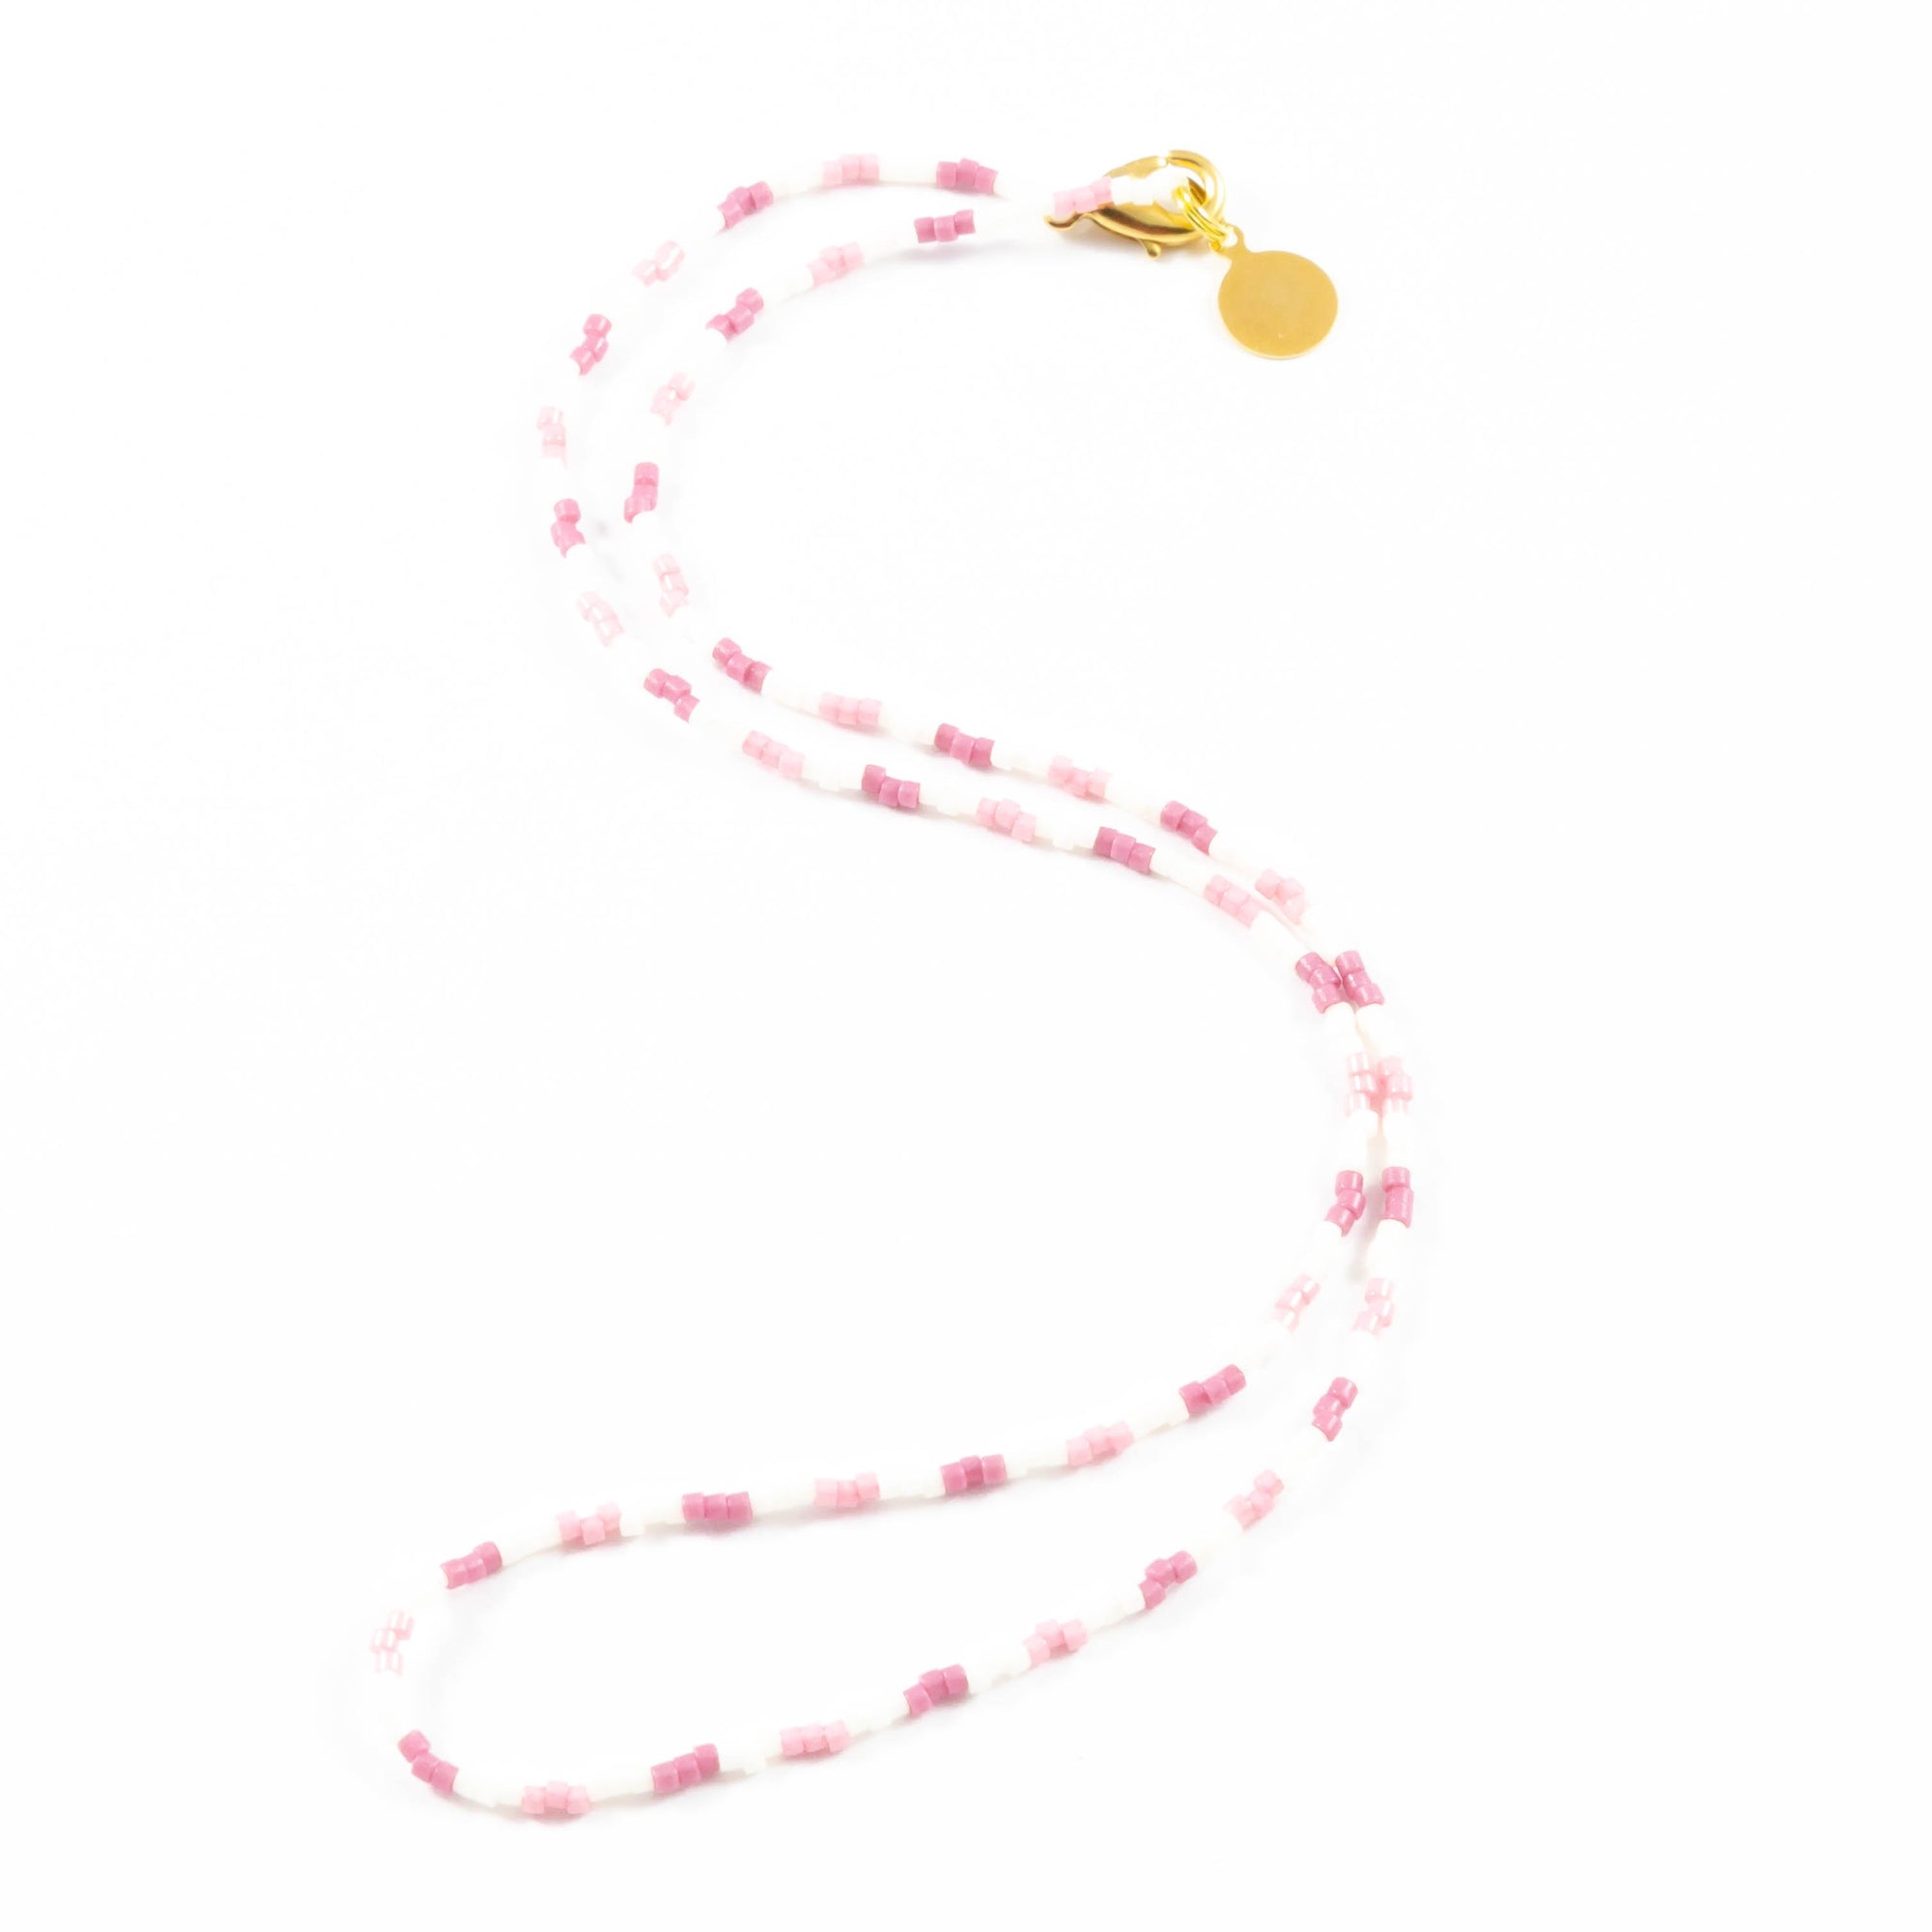 Pinks Shades of Giving Wanderlust Necklace